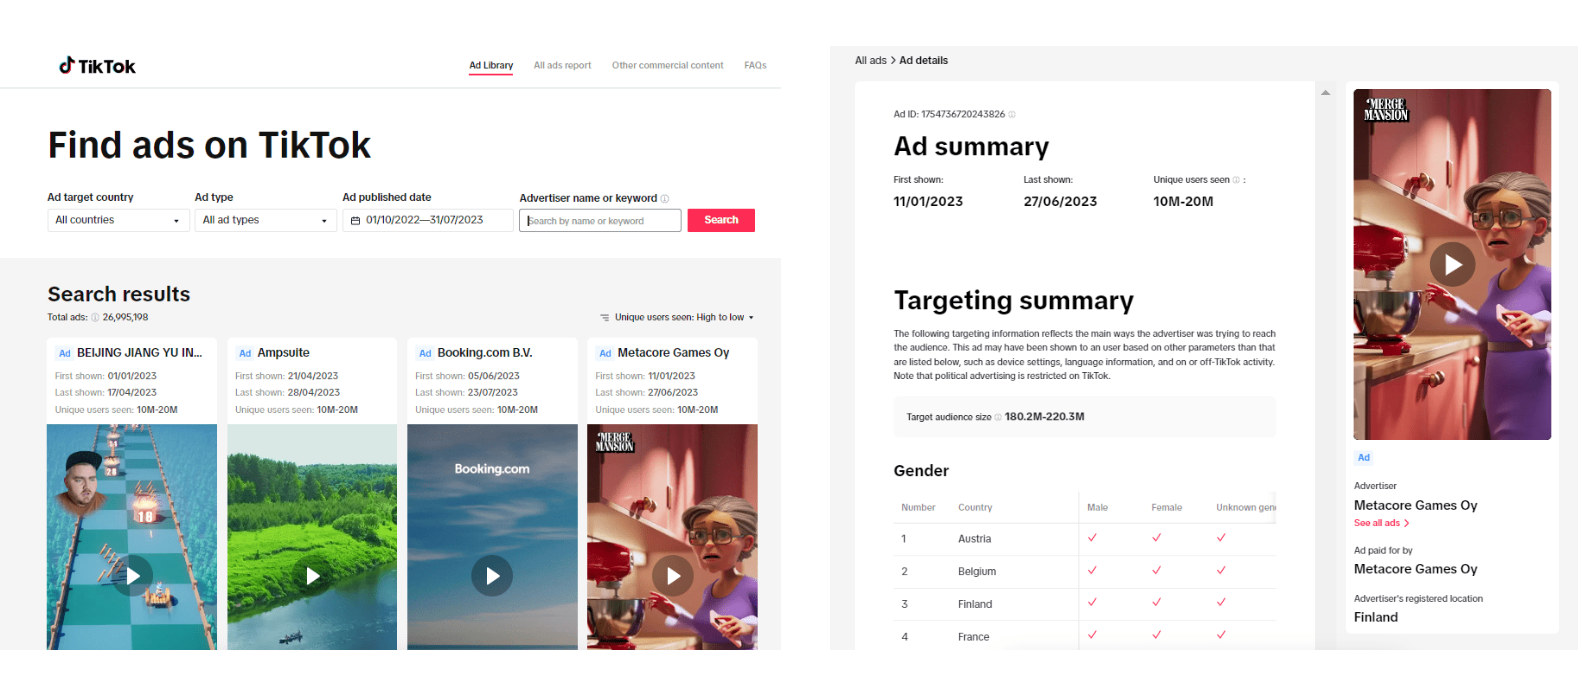 TikTok's Commercial Content Library: How to Use and Download Ads?